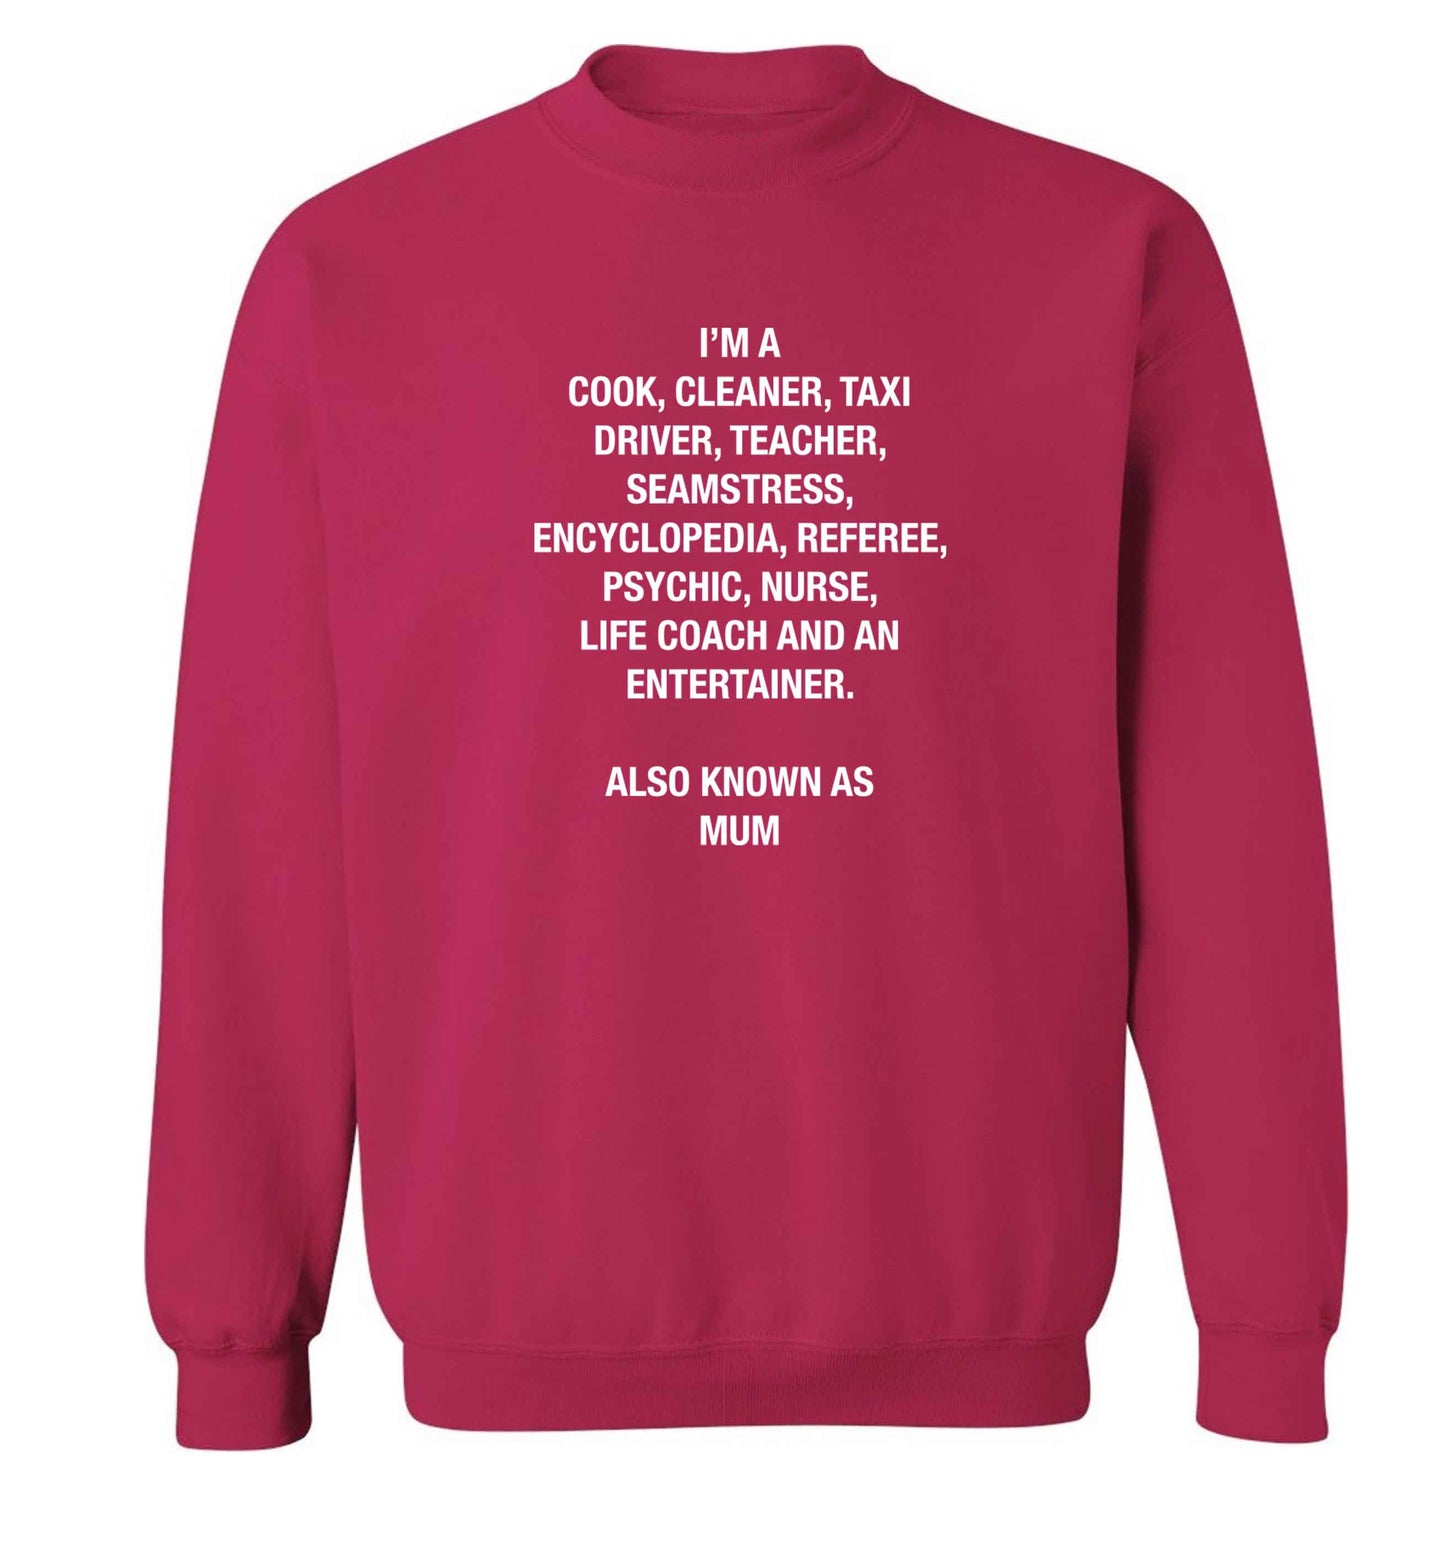 Funny gifts for your mum on mother's dayor her birthday! Mum, cook, cleaner, taxi driver, teacher, seamstress, encyclopedia, referee, psychic, nurse, life coach and entertainer adult's unisex pink sweater 2XL